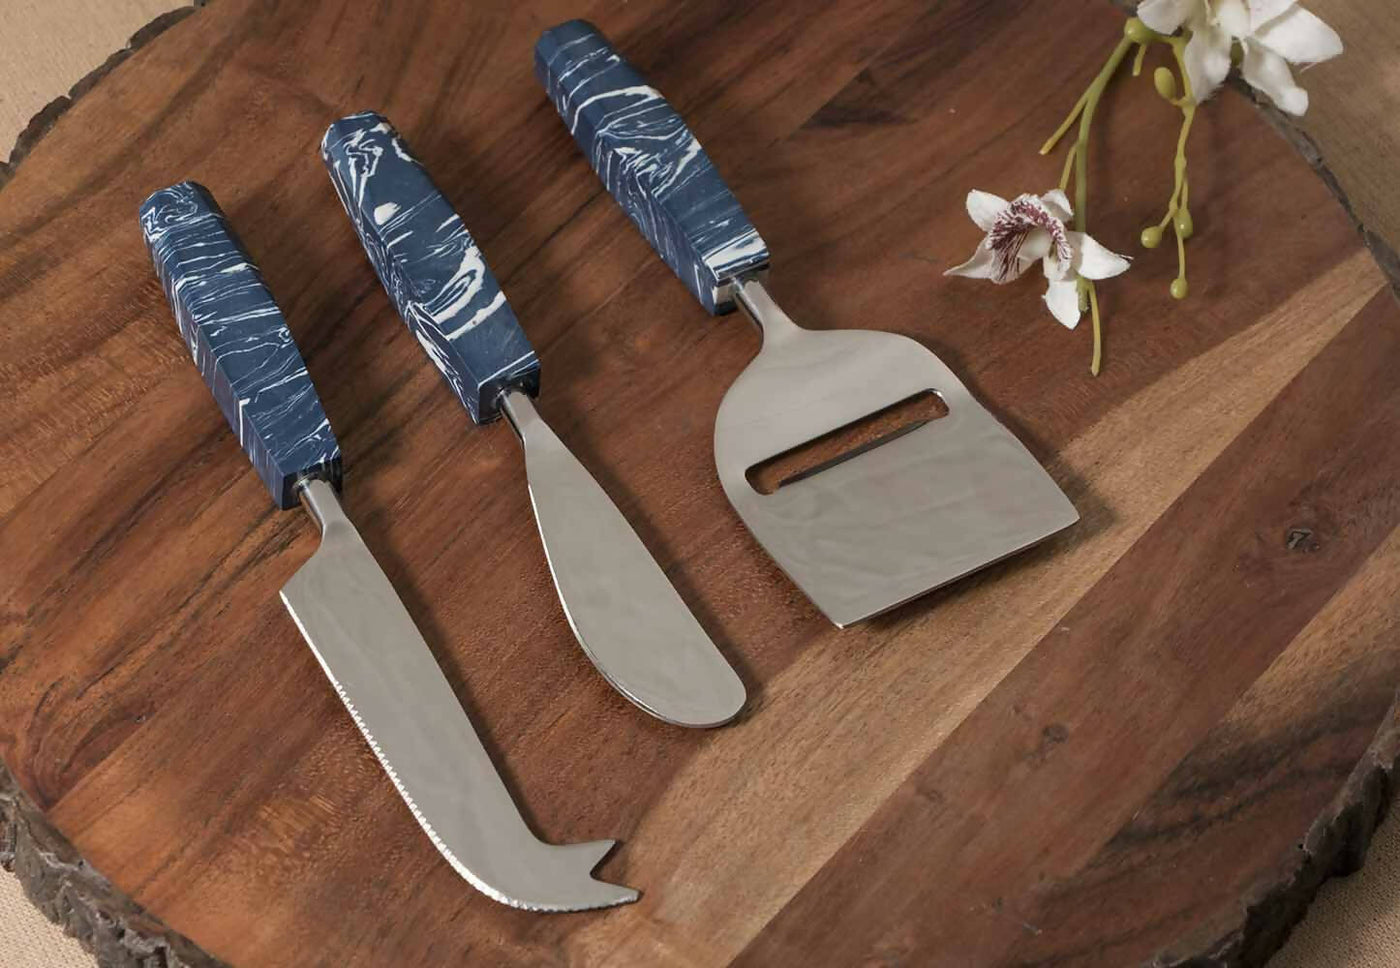 Set of 3 Stainless Steel Cheese Knives with Handle Made of Composite Stone - Dining & Kitchen - 1